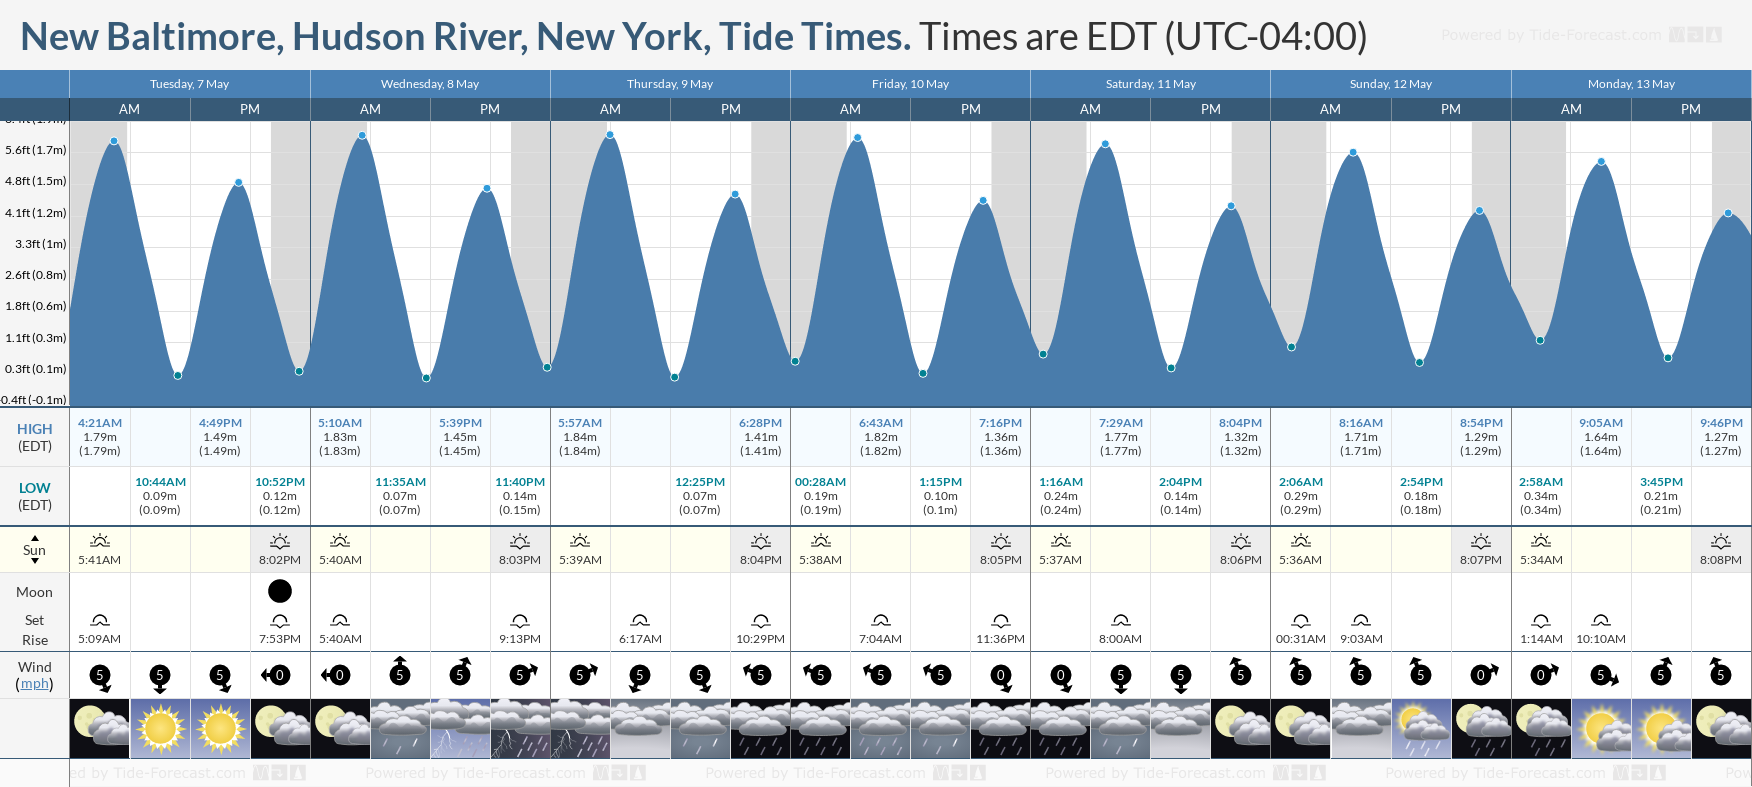 New Baltimore, Hudson River, New York Tide Chart including high and low tide times for the next 7 days